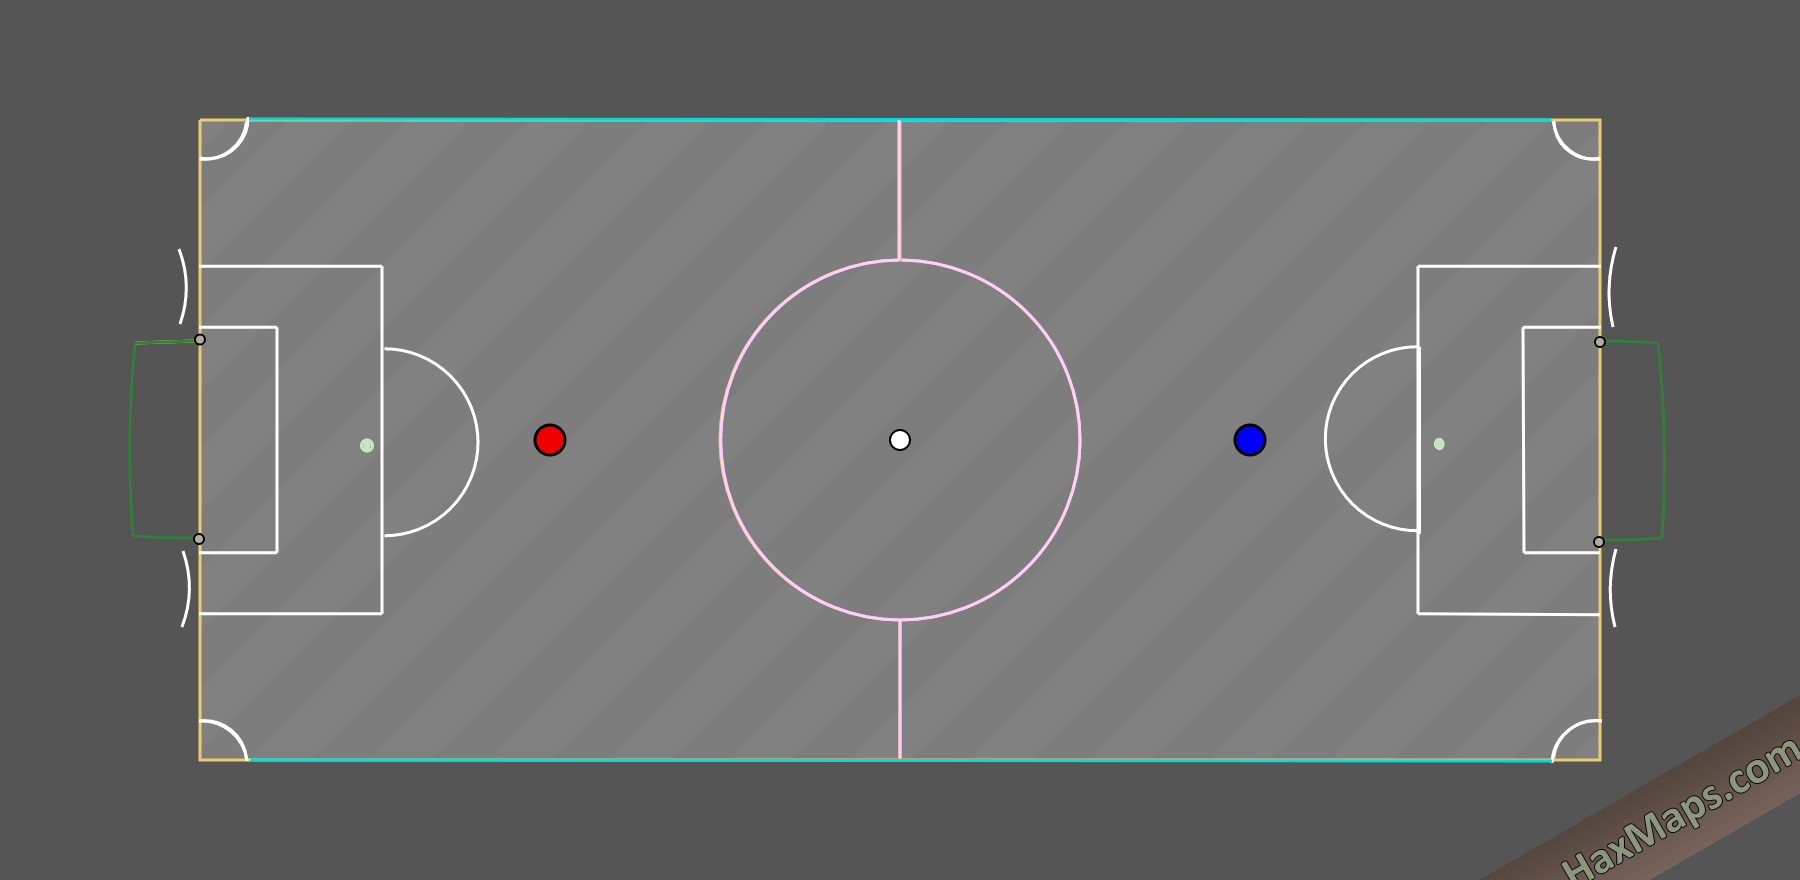 hax ball maps | Power Mini Real Soccer by Bledsoe